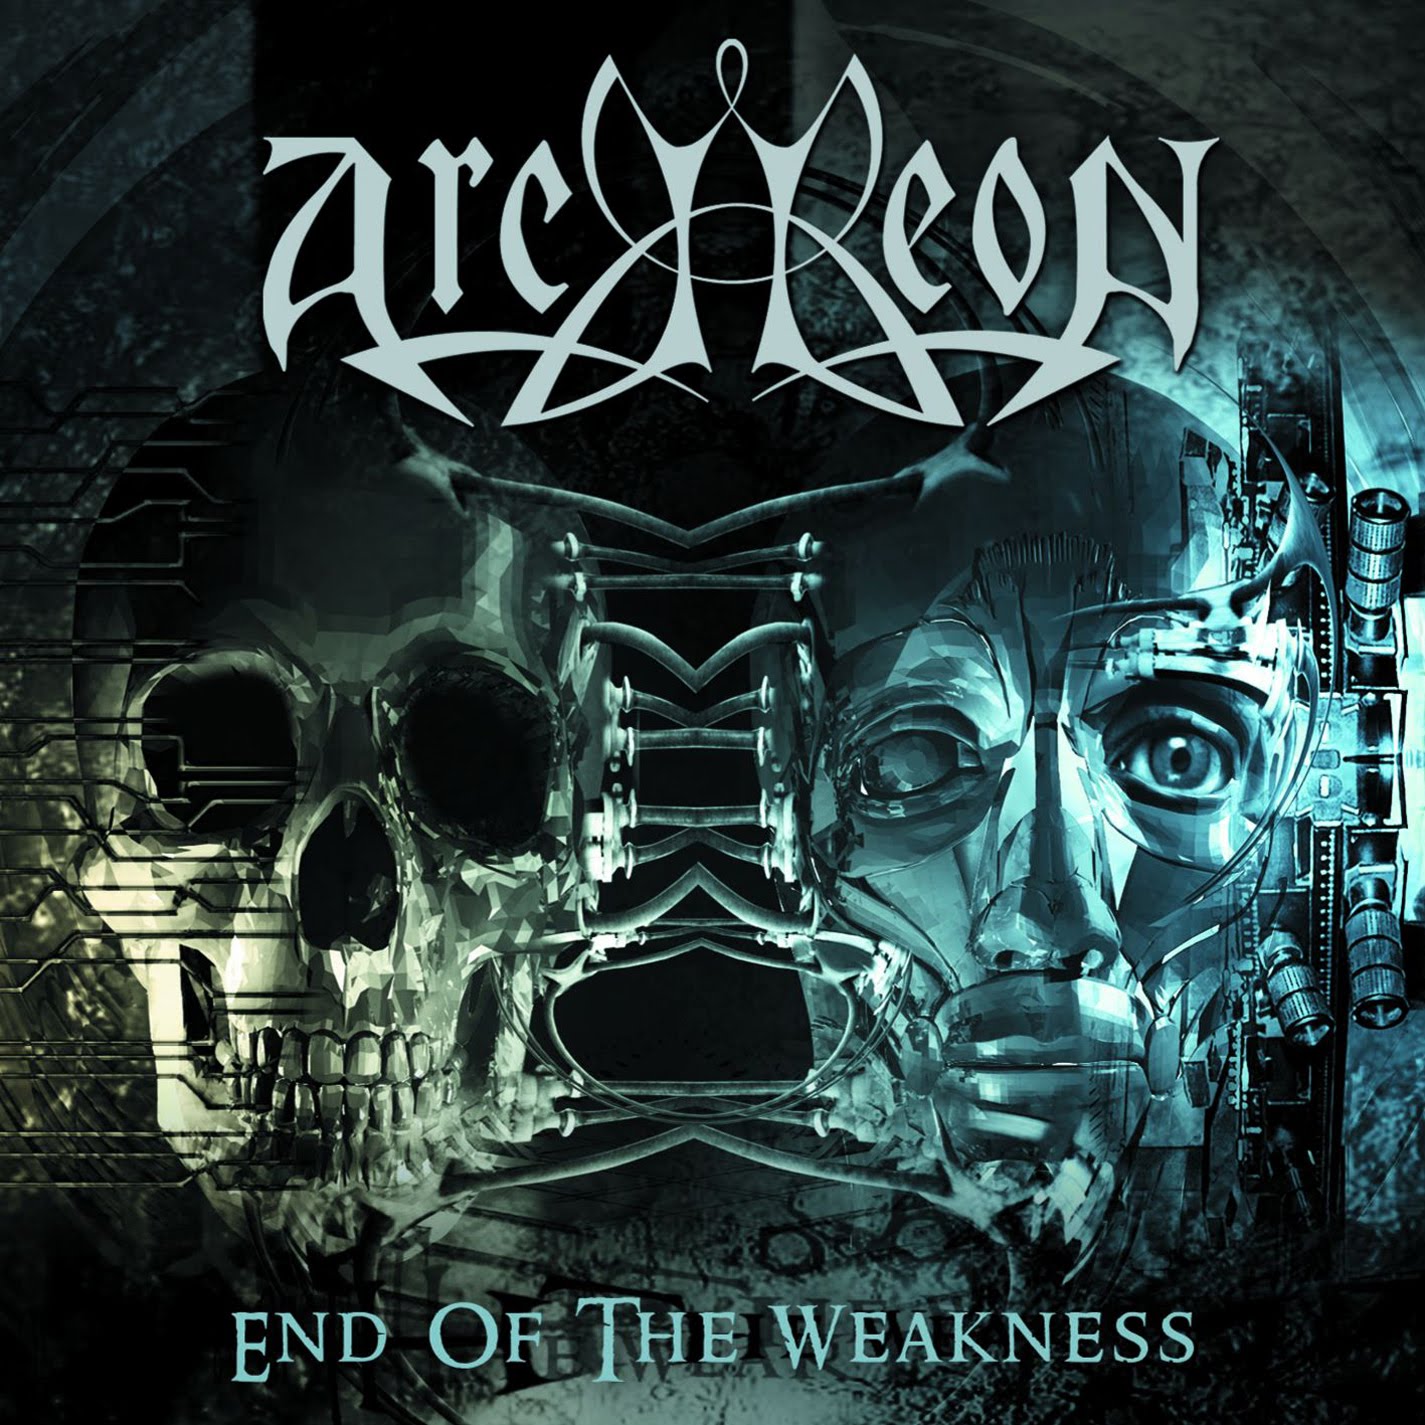 Archeon - End Of The Weakness (2005)